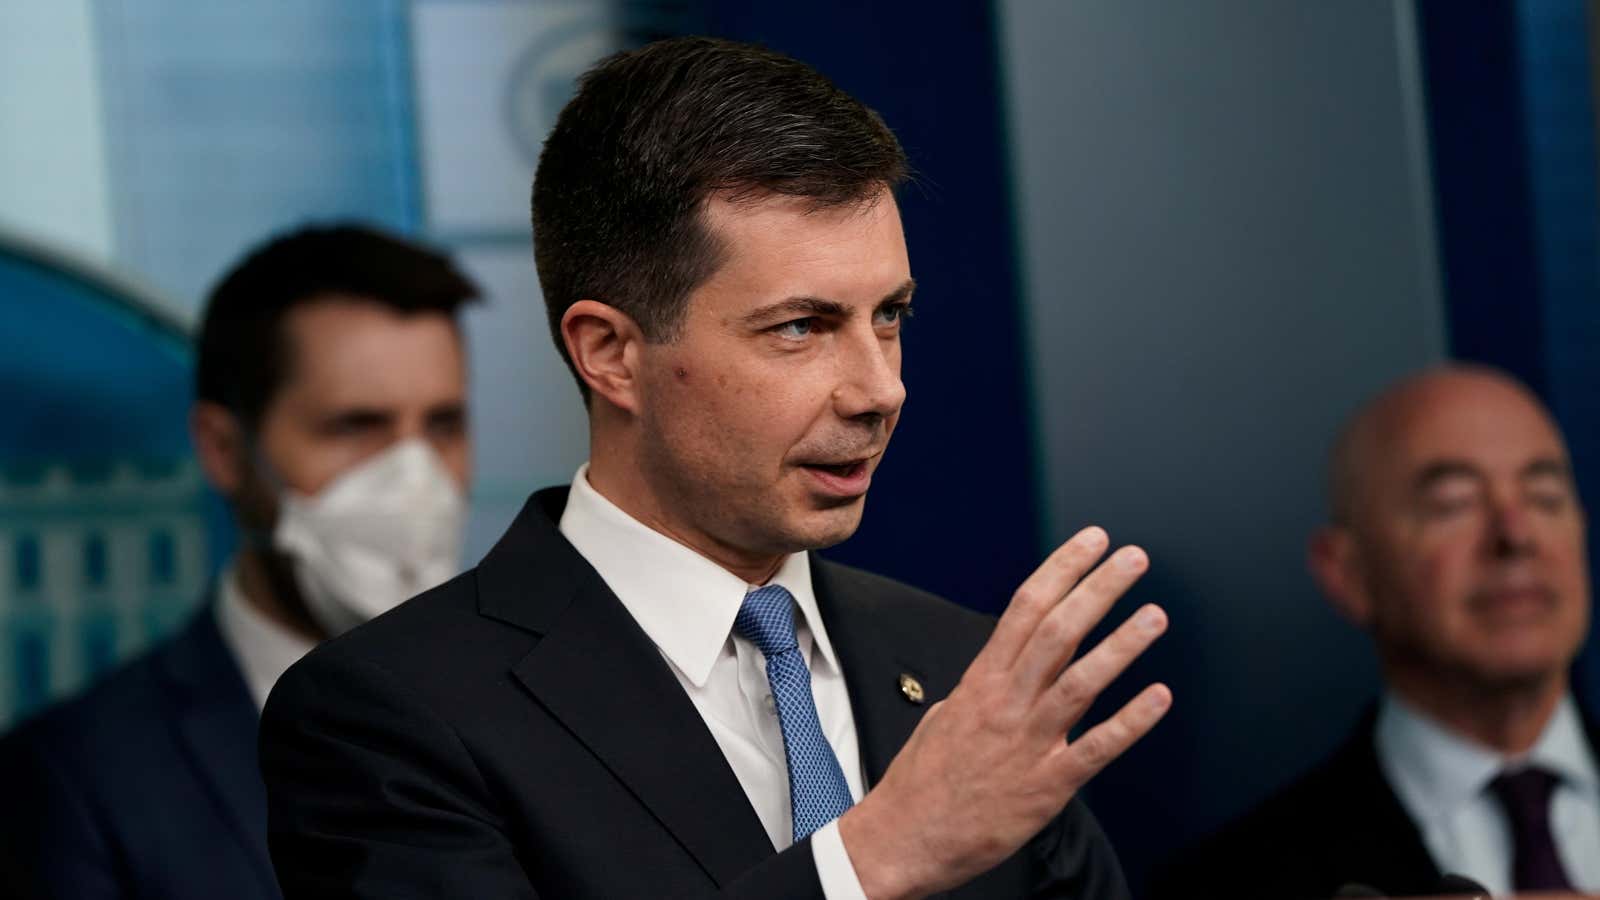 Pete Buttigieg would like to offer the EV and AV skeptics a different perspective.